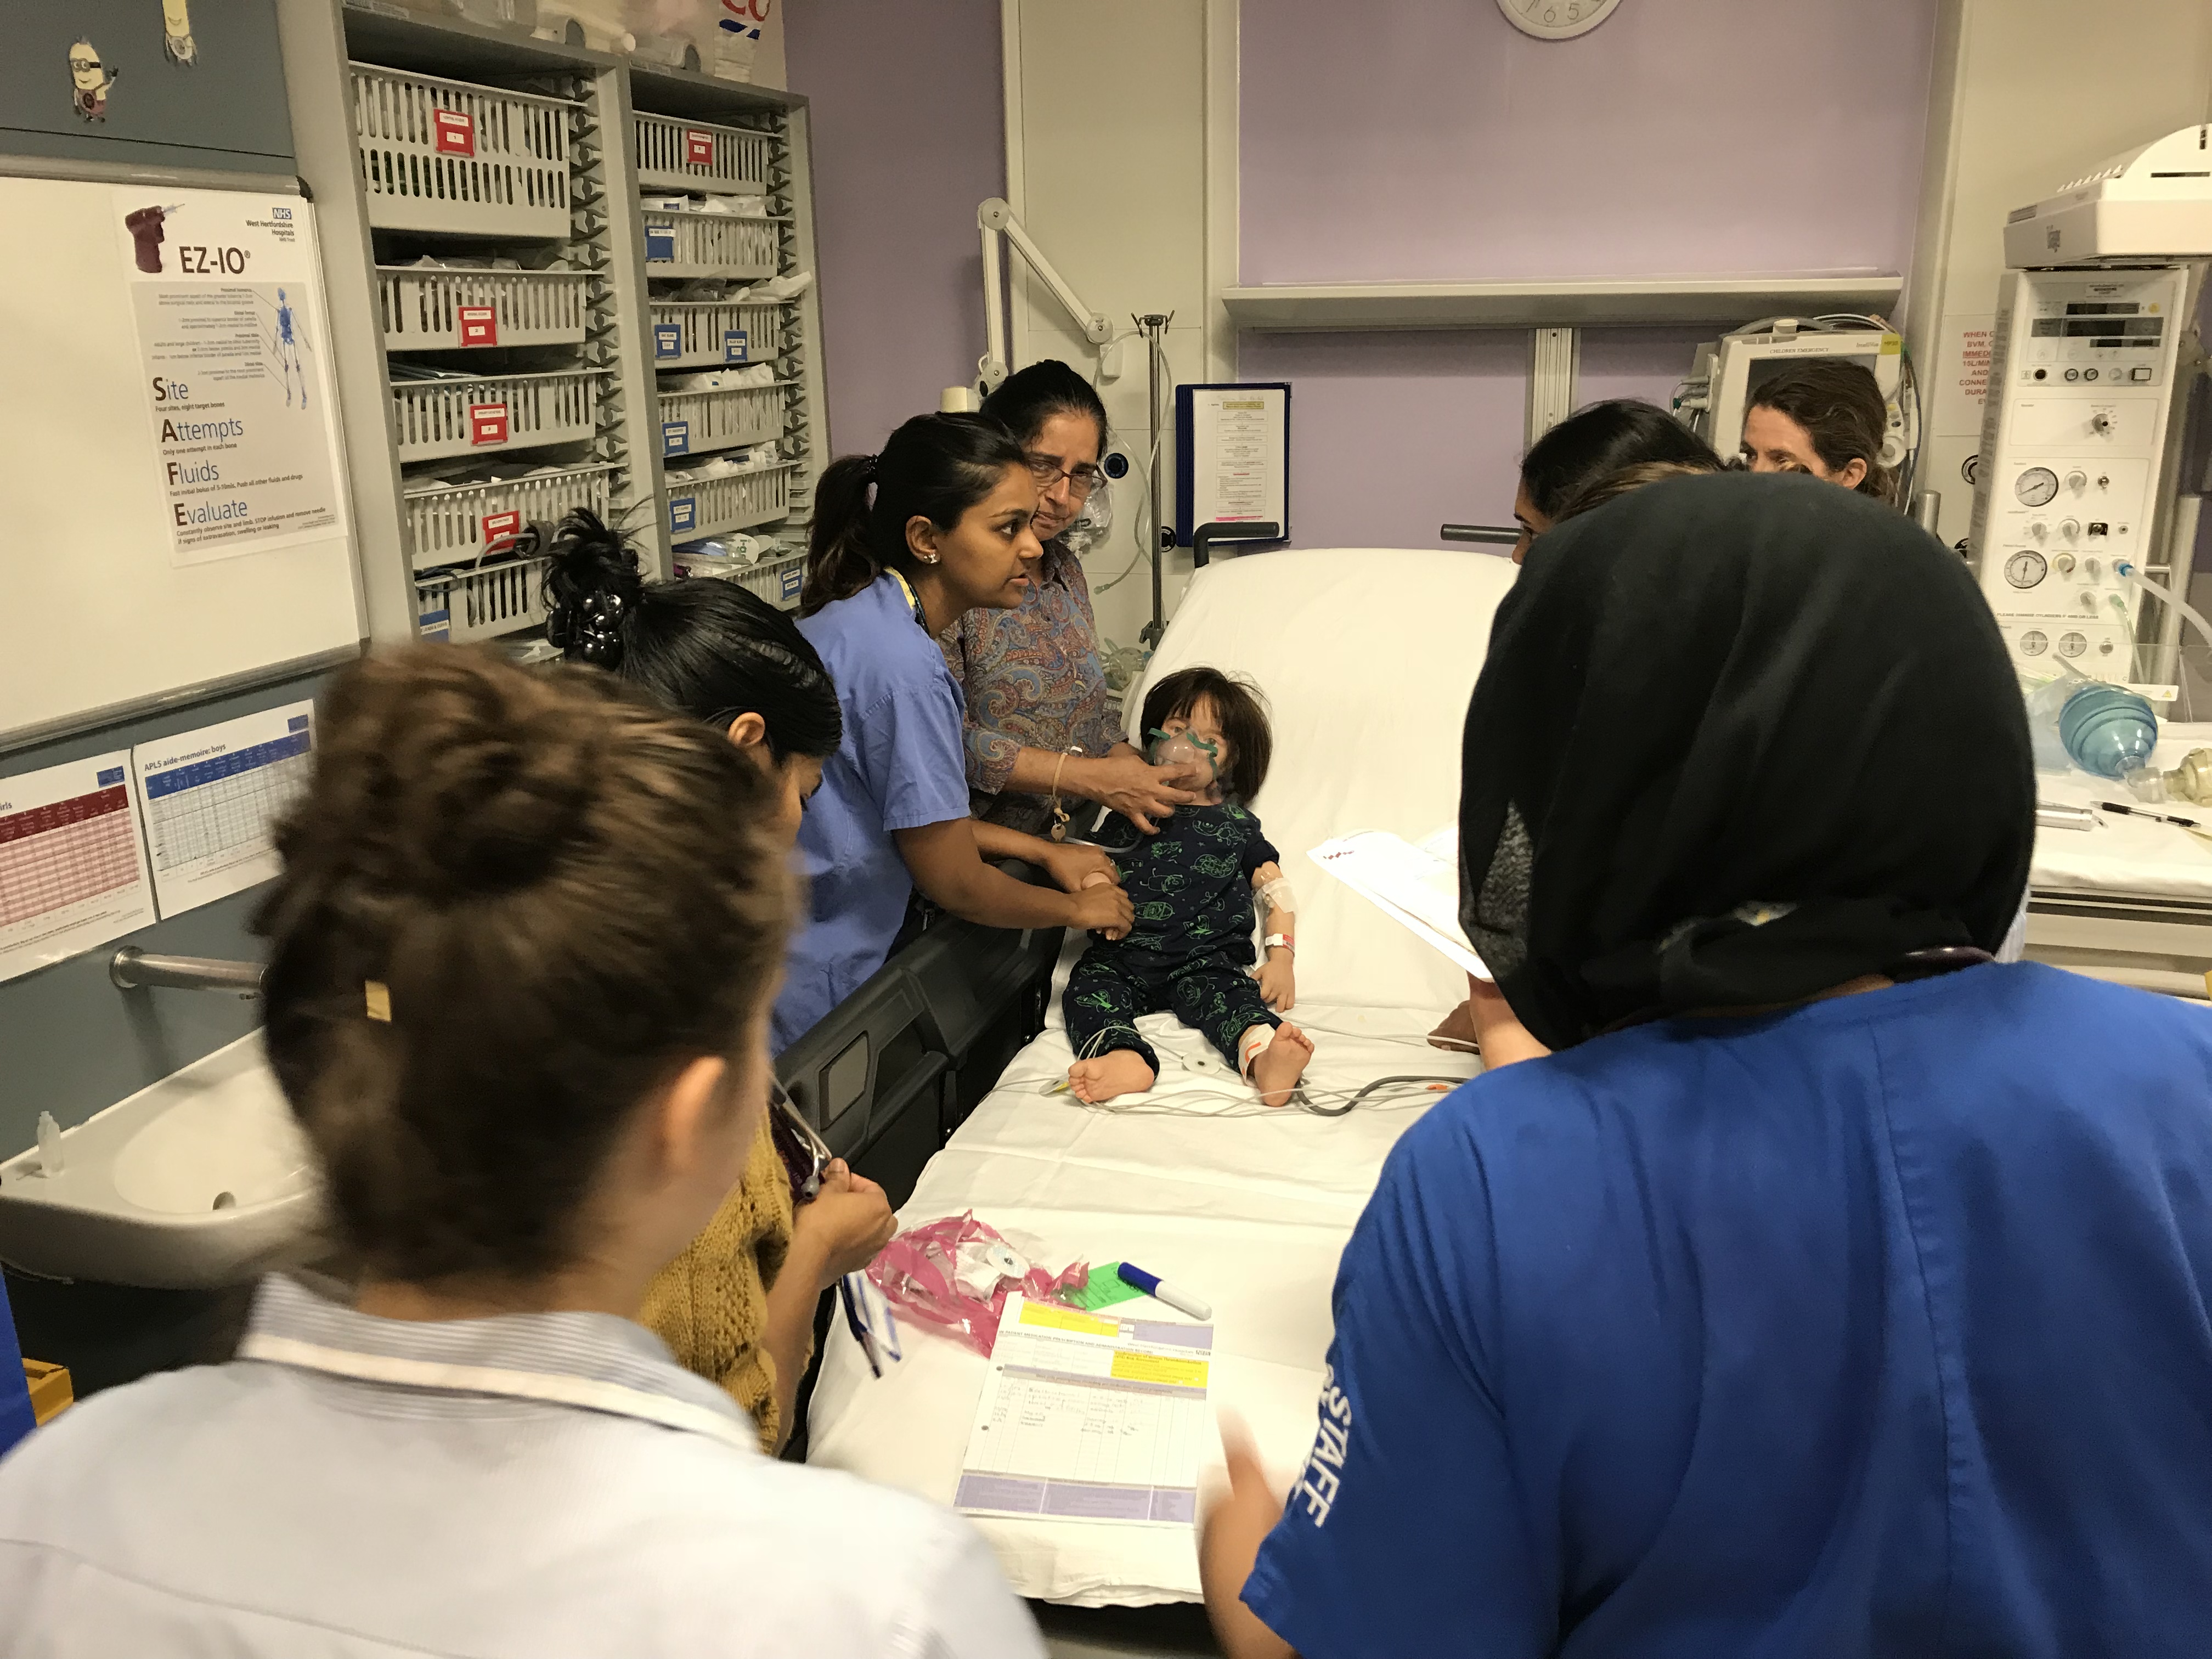 Picture shows a simulated paediatric patient being treated by a multi disciplinary team in the Childrens Emergency Department